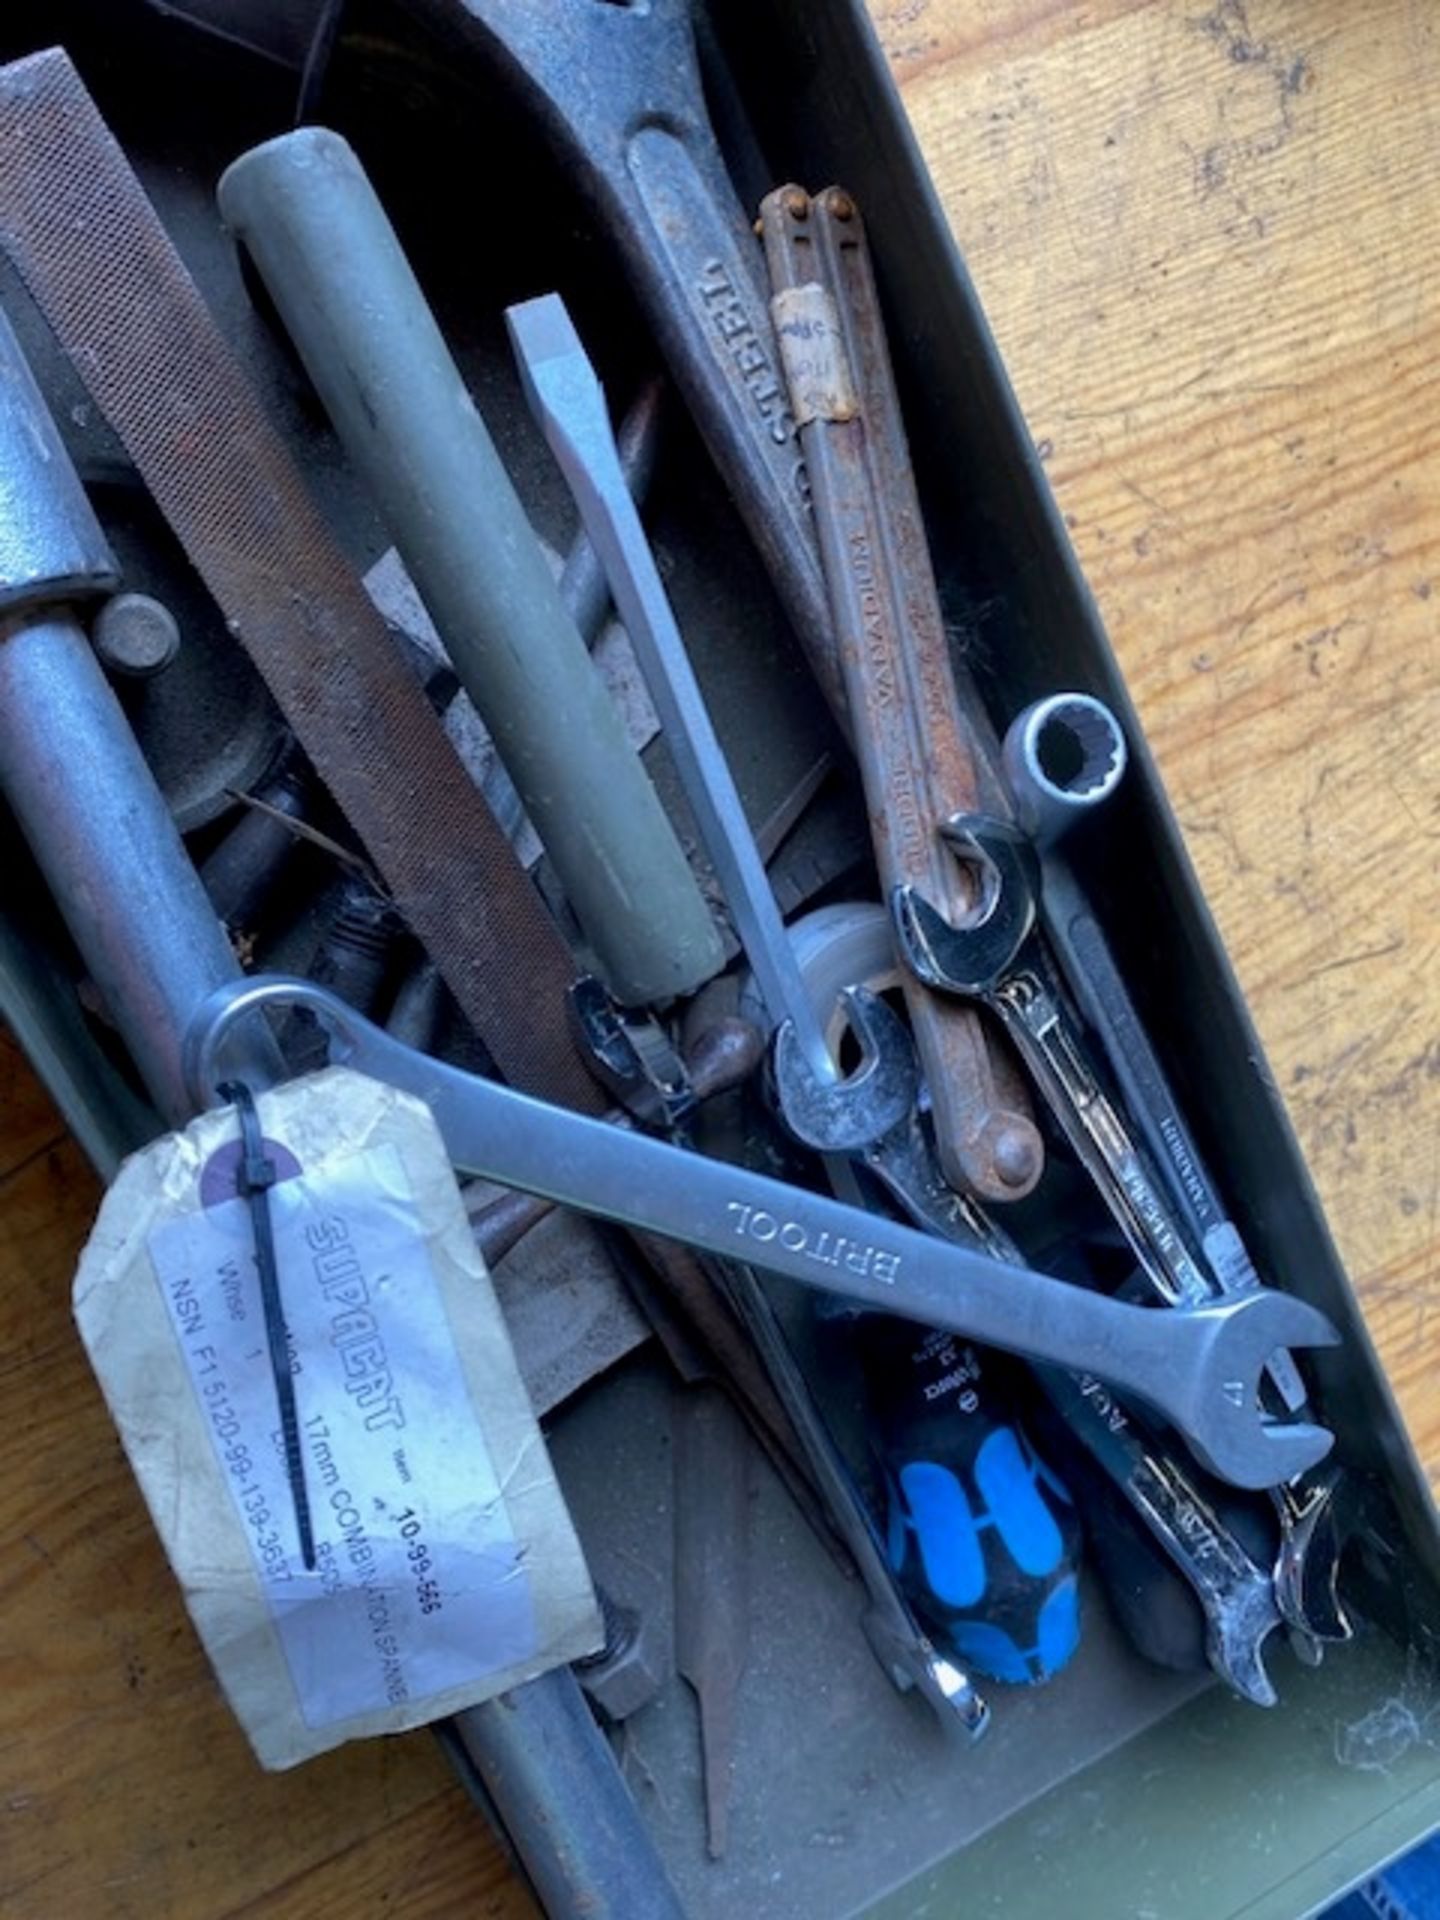 Tools and Tool Box - Image 7 of 7